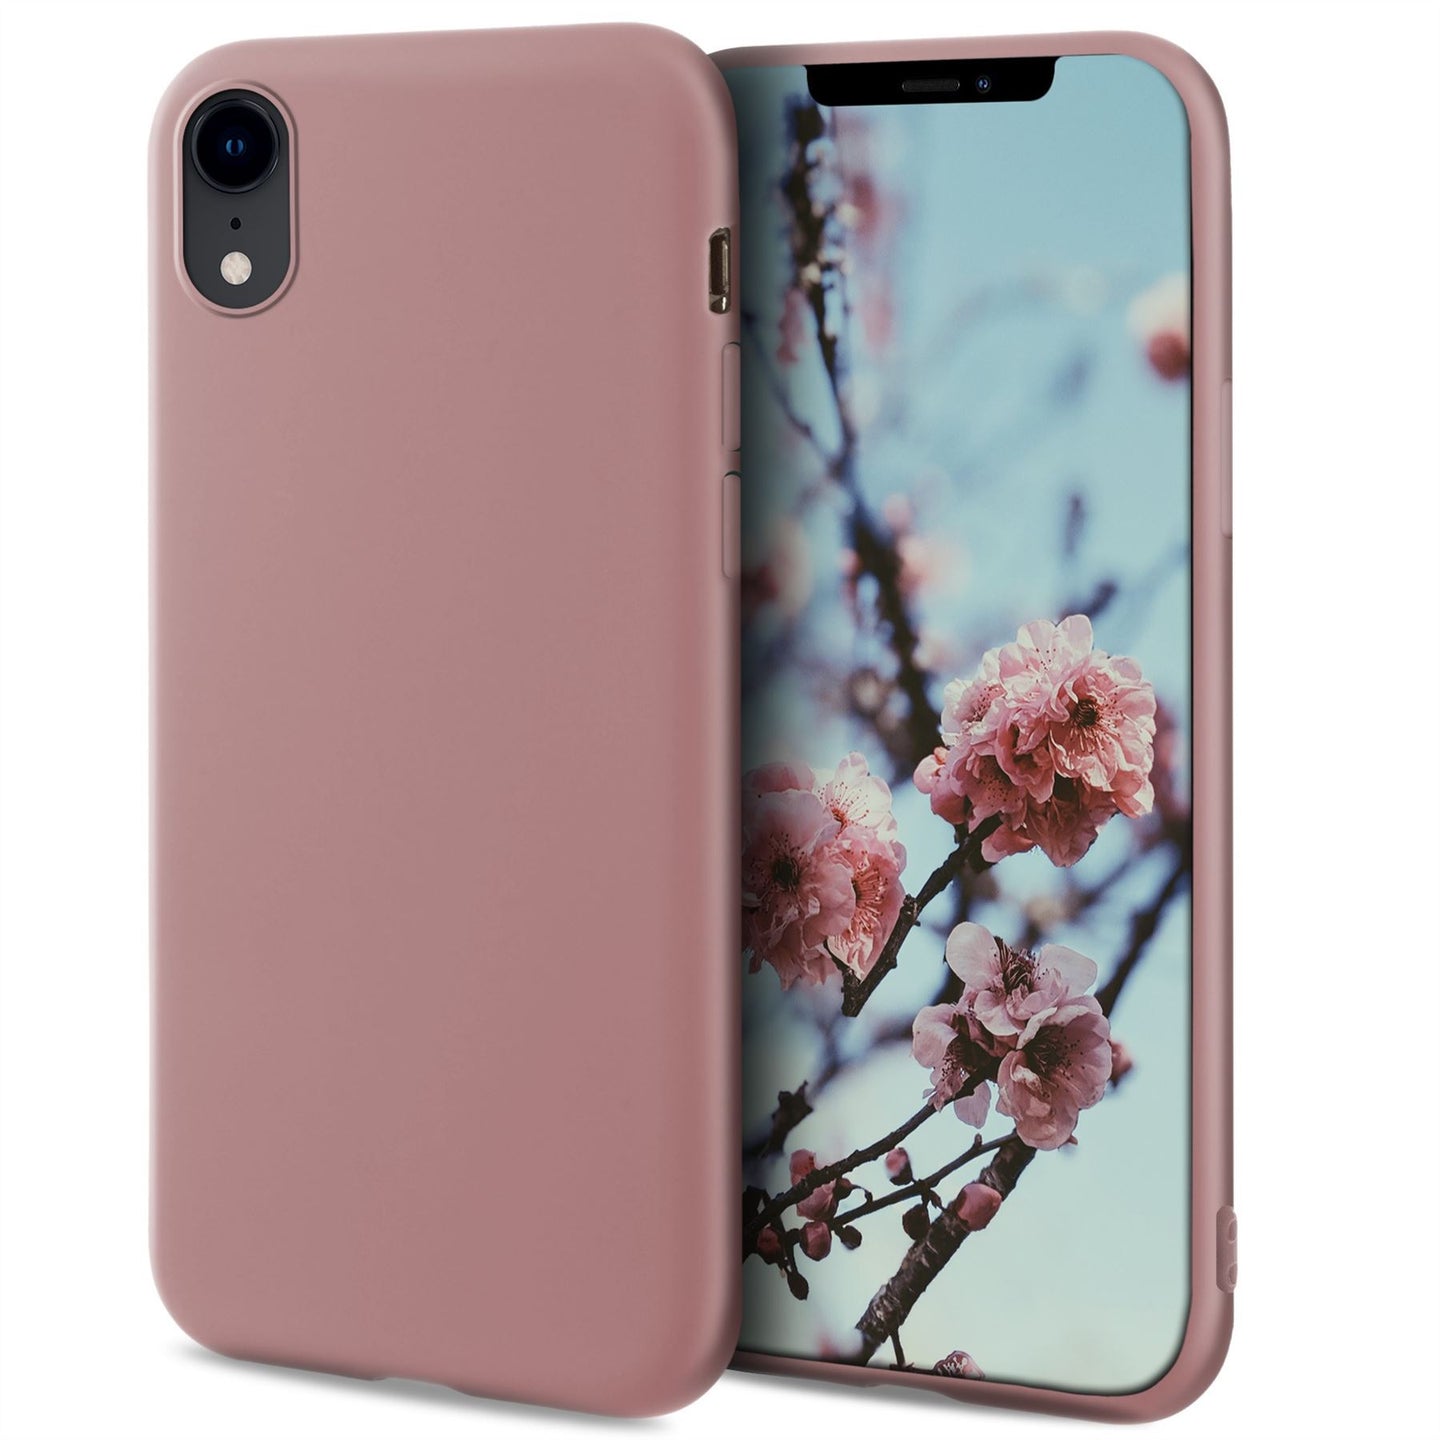 Moozy Minimalist Series Silicone Case for iPhone XR, Rose Beige - Matte Finish Slim Soft TPU Cover